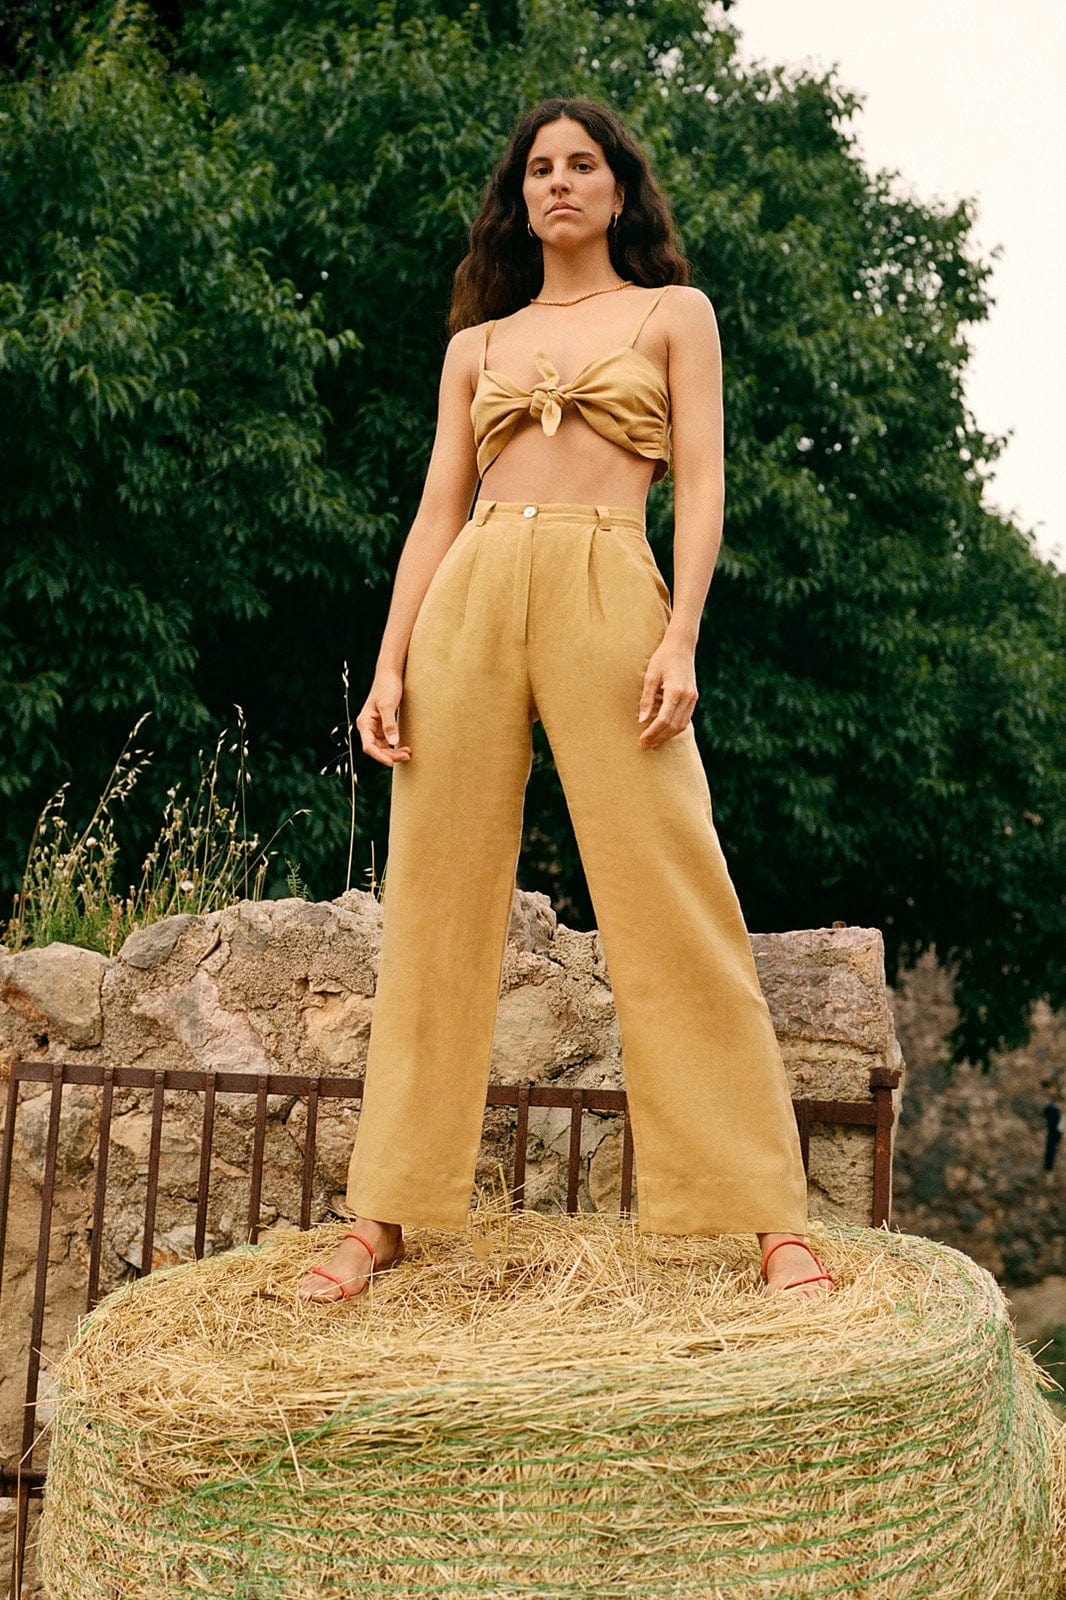 arkitaip Trousers The Wabi Pleated Linen Trousers in ochre - Sample